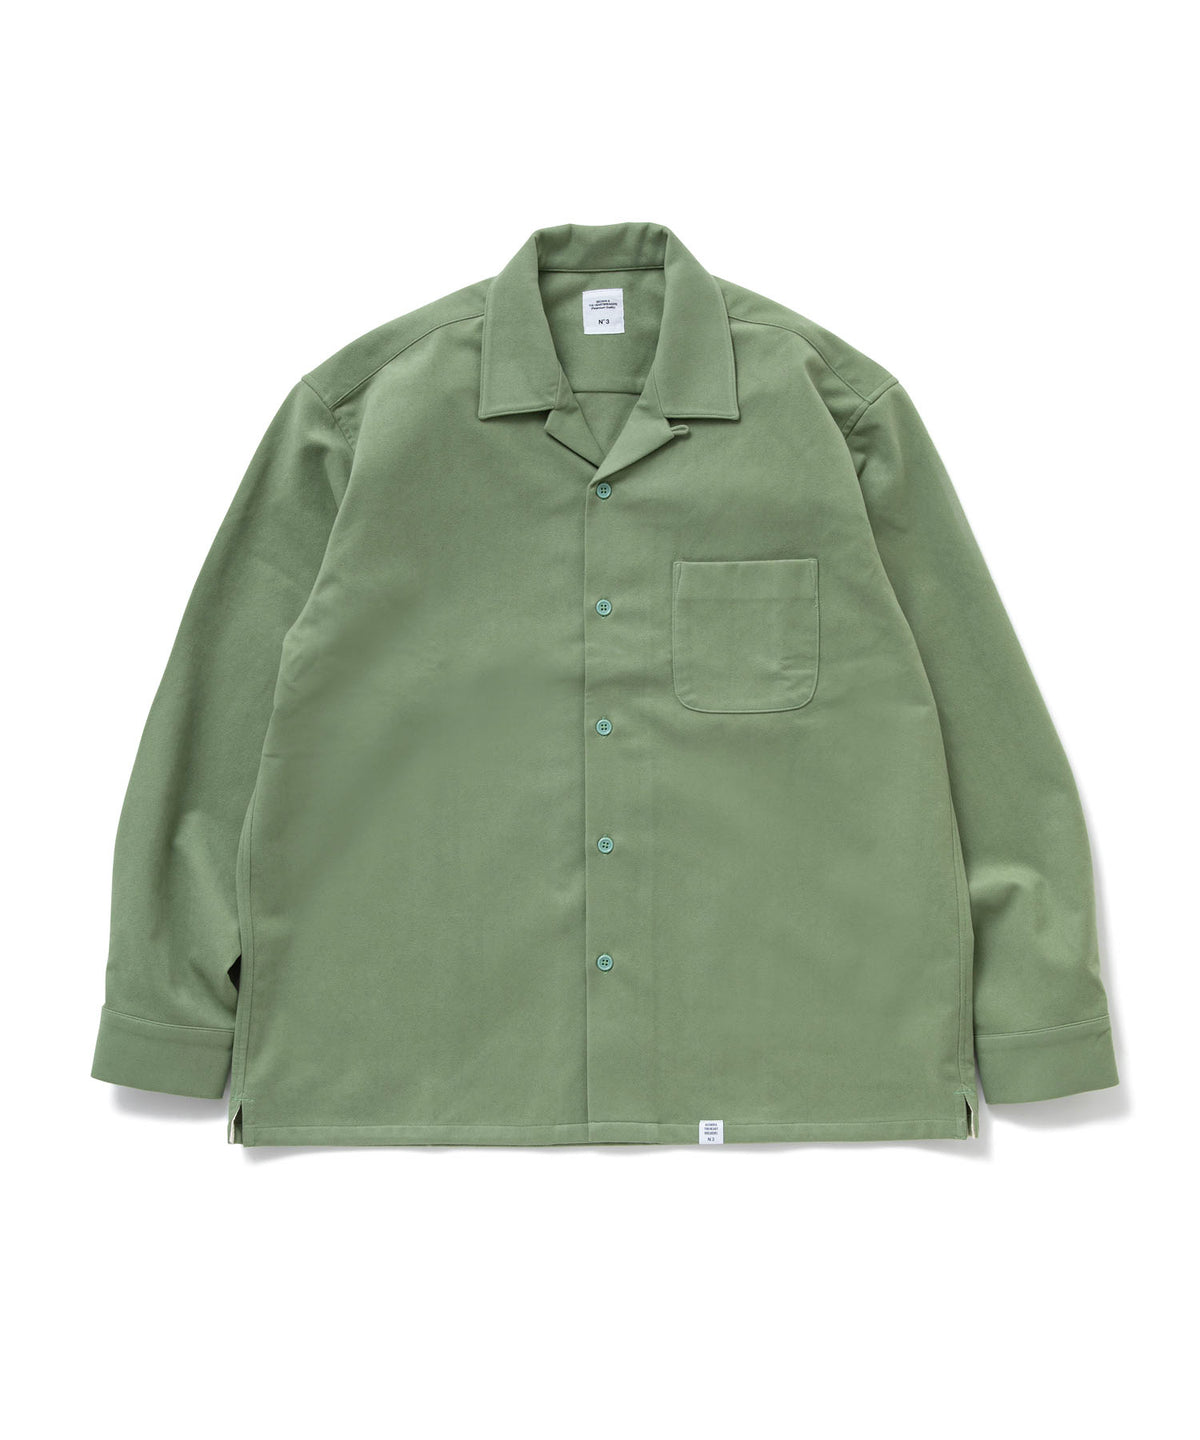 L/S OPEN COLLAR FAKE SUEDE SHIRT 